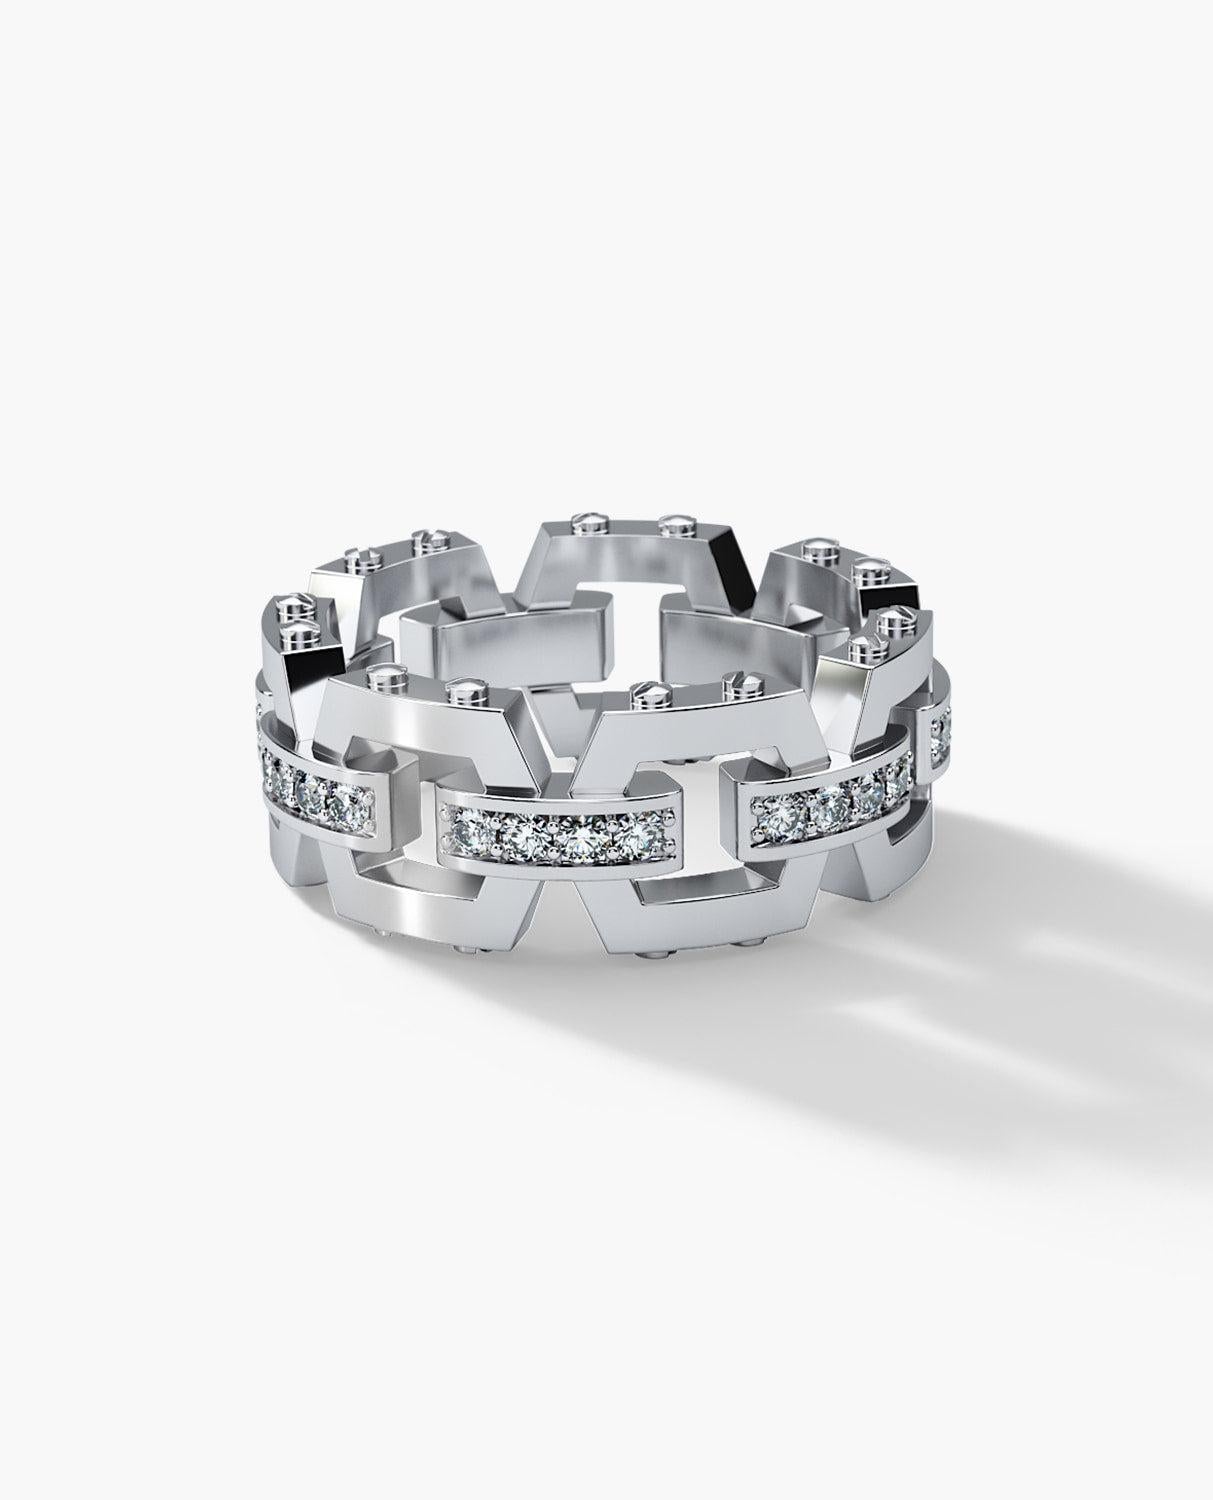 Contemporary NORTHSTAR 14k White Gold Ring with 0.60ct Diamonds